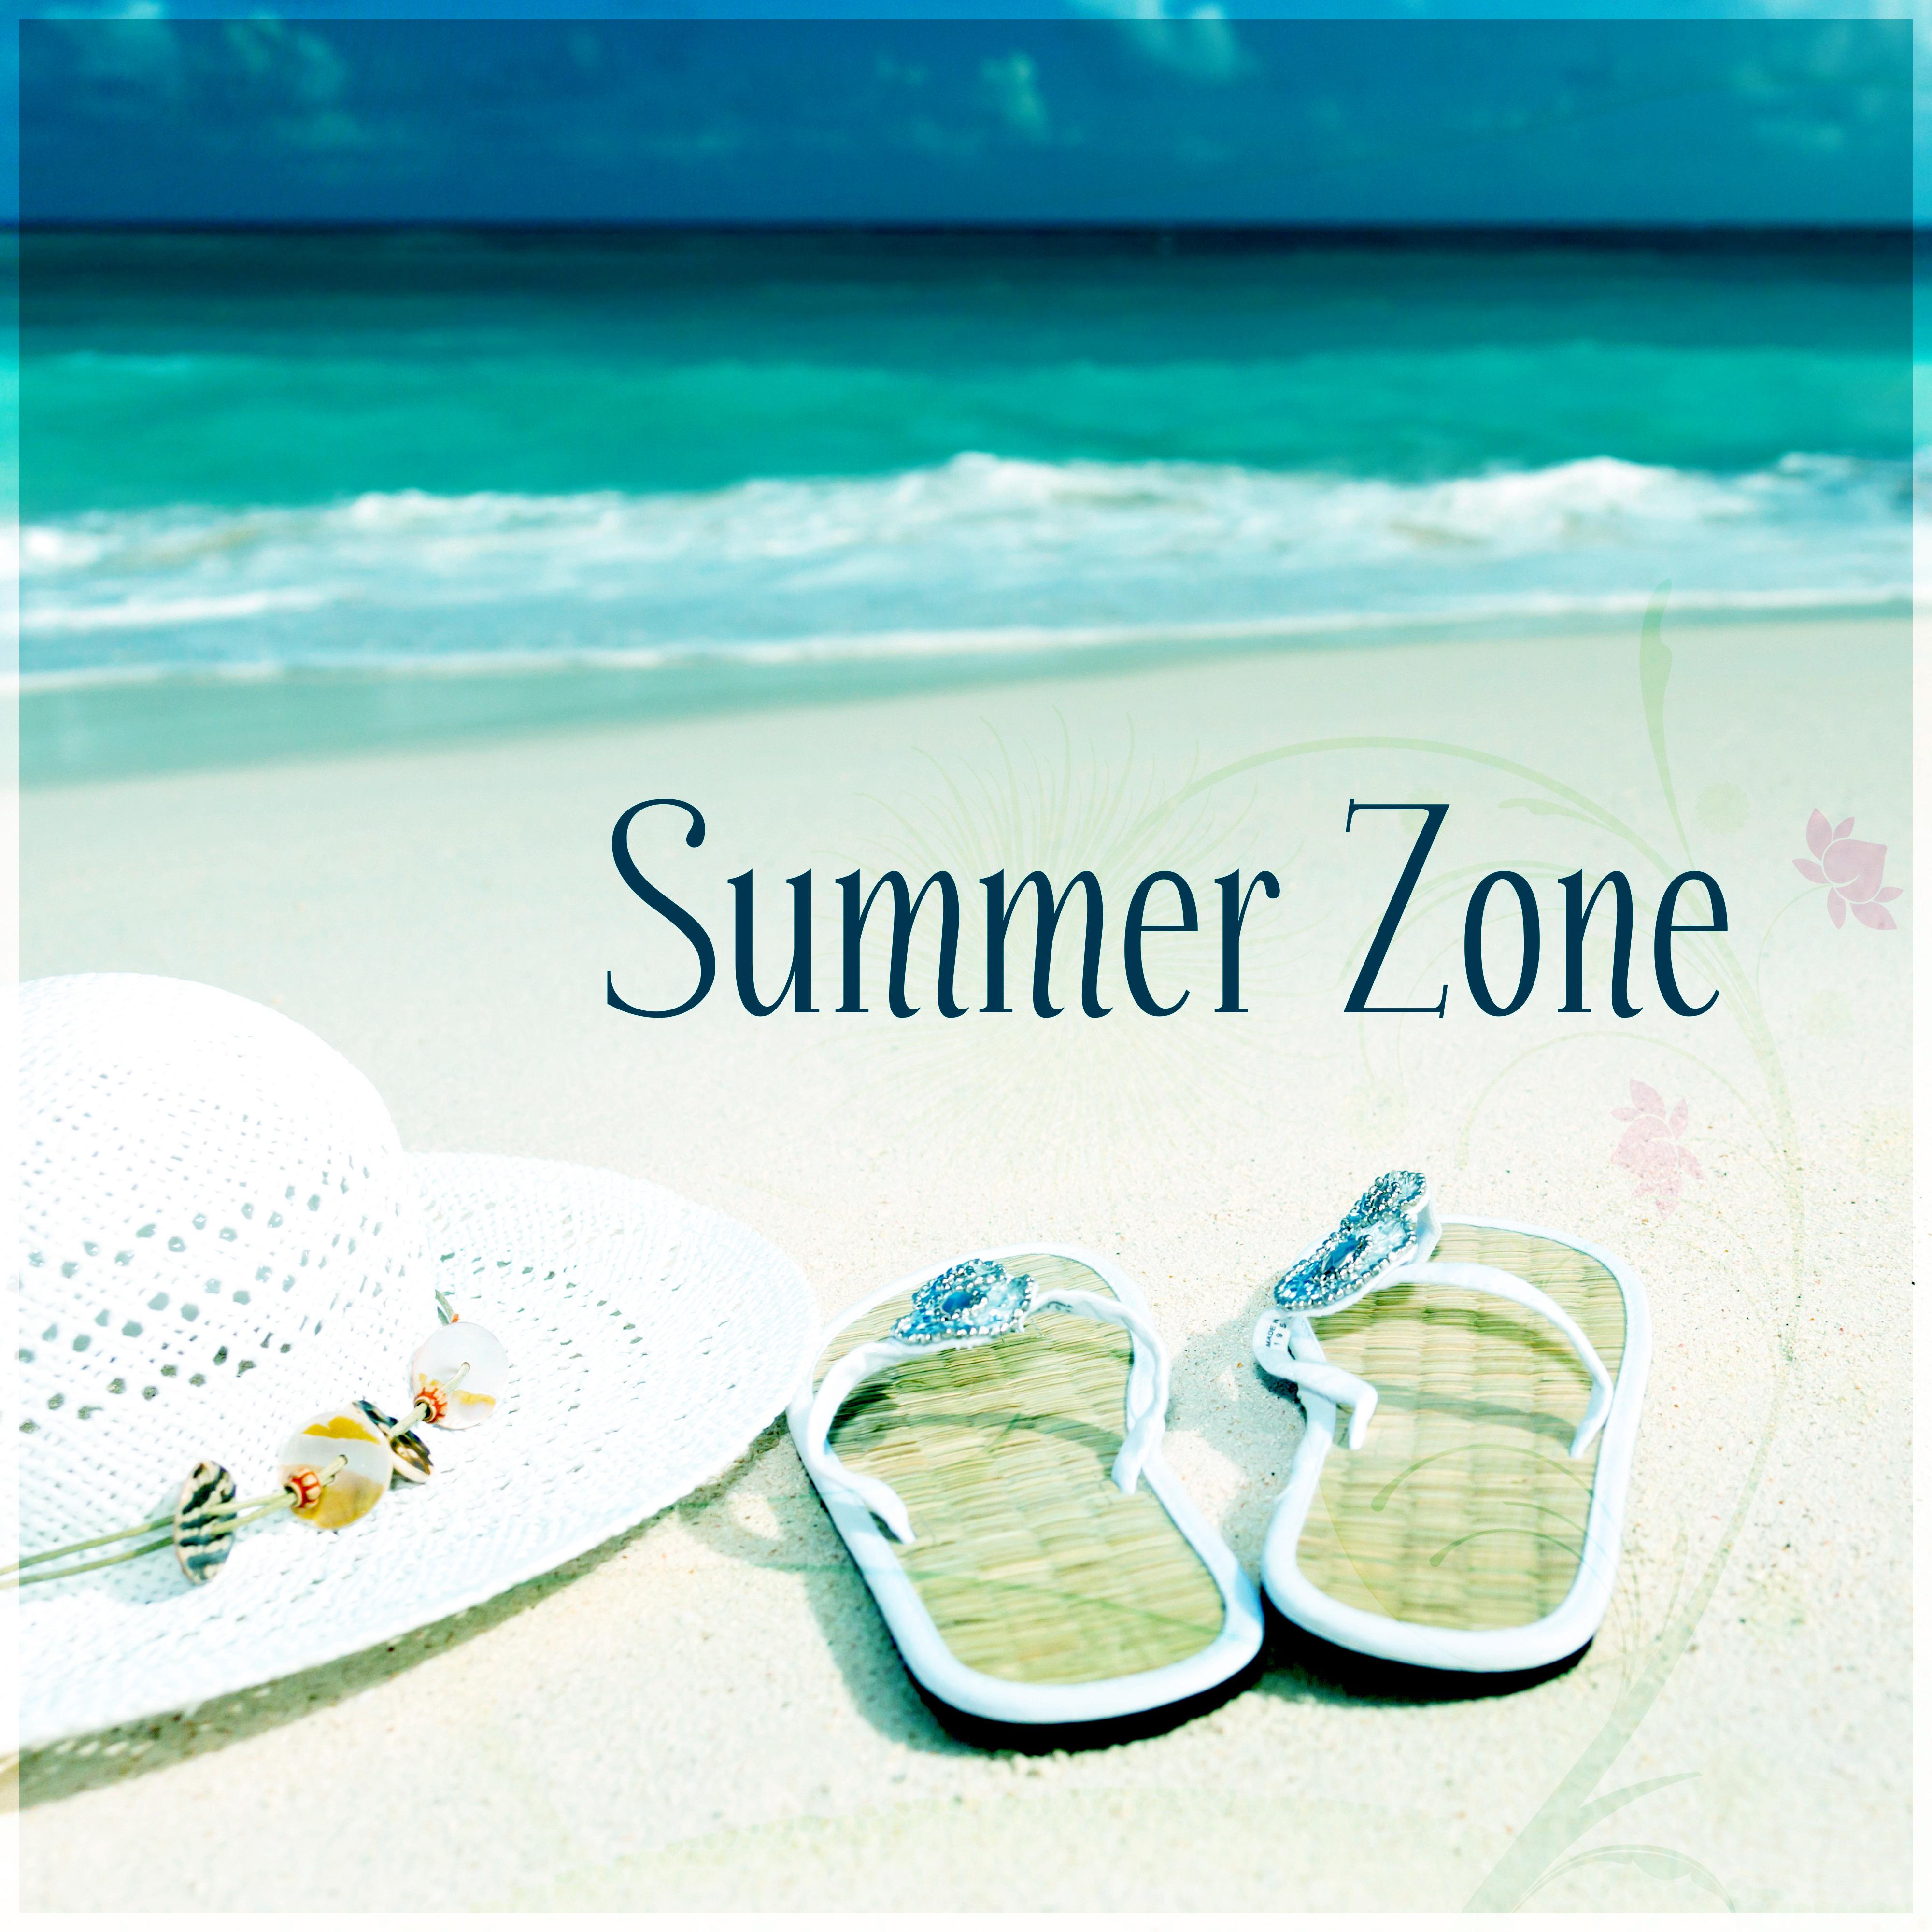 Summer Zone – Solar Surfer, Beach Party, Chill Out Music, Deep Vibes, Cafe Bar, Lounge